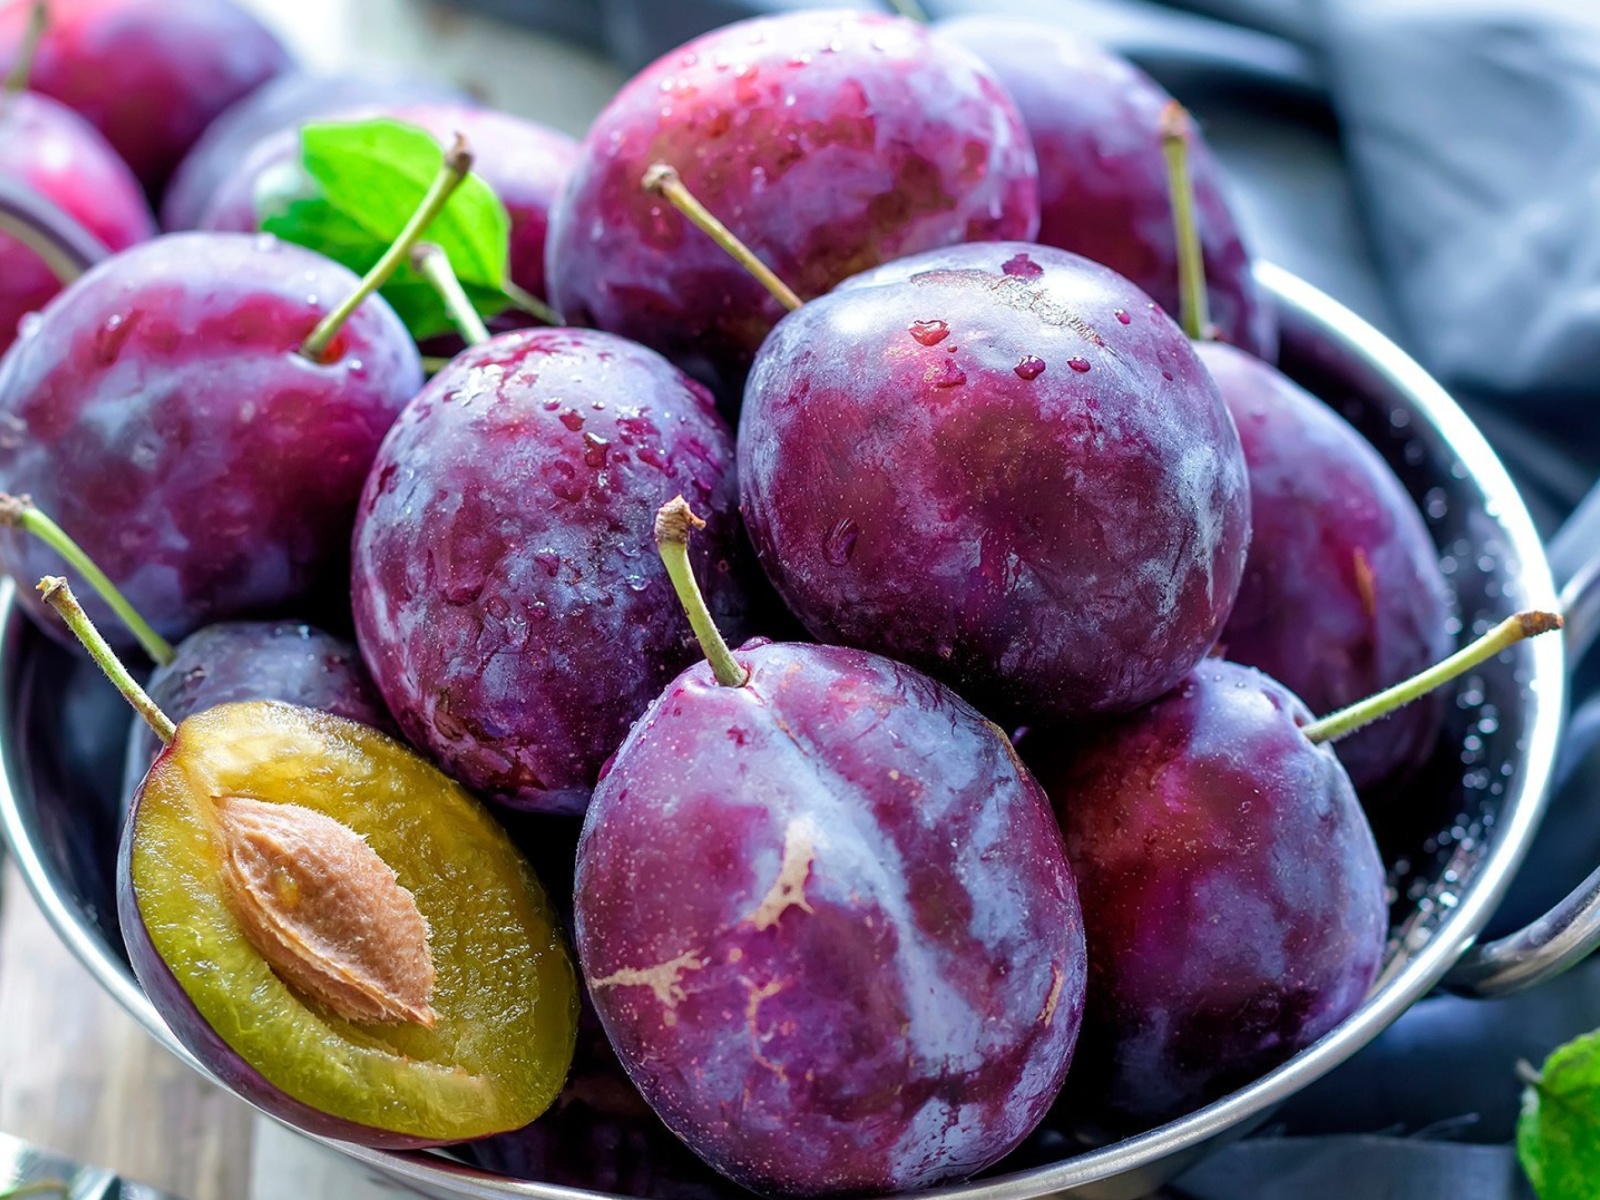 Plums with Vitamins wallpaper 1600x1200